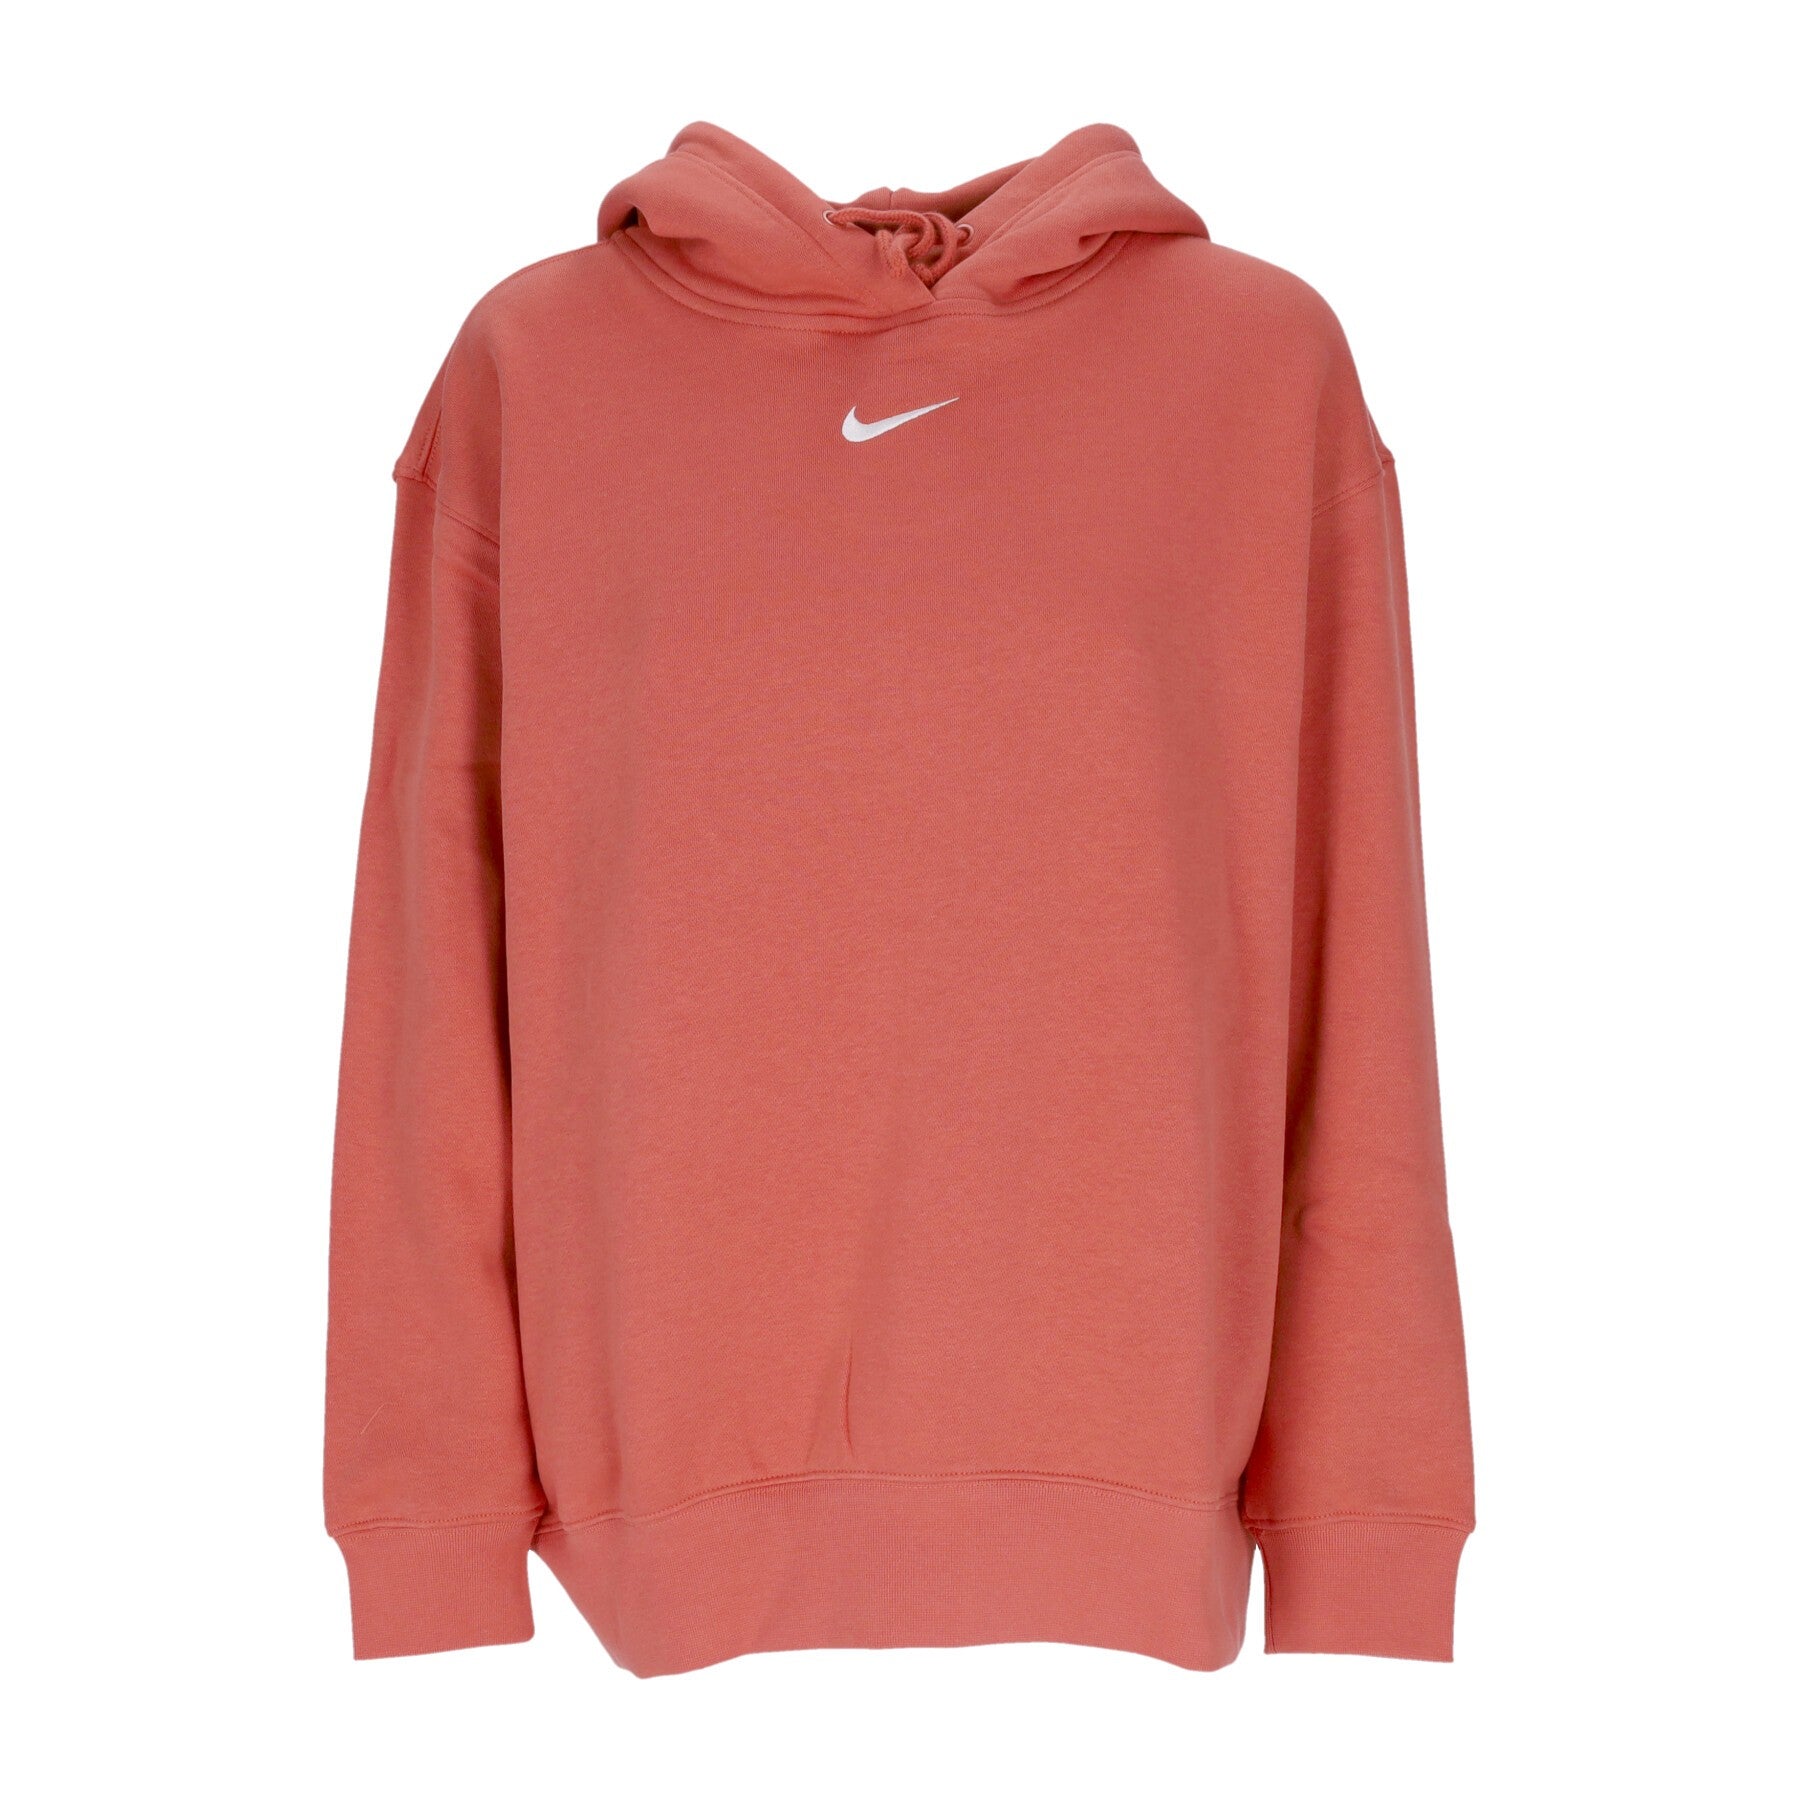 Nike, Felpa Cappuccio Donna Essential Collection Fleece Hoodie, Madder Root/white